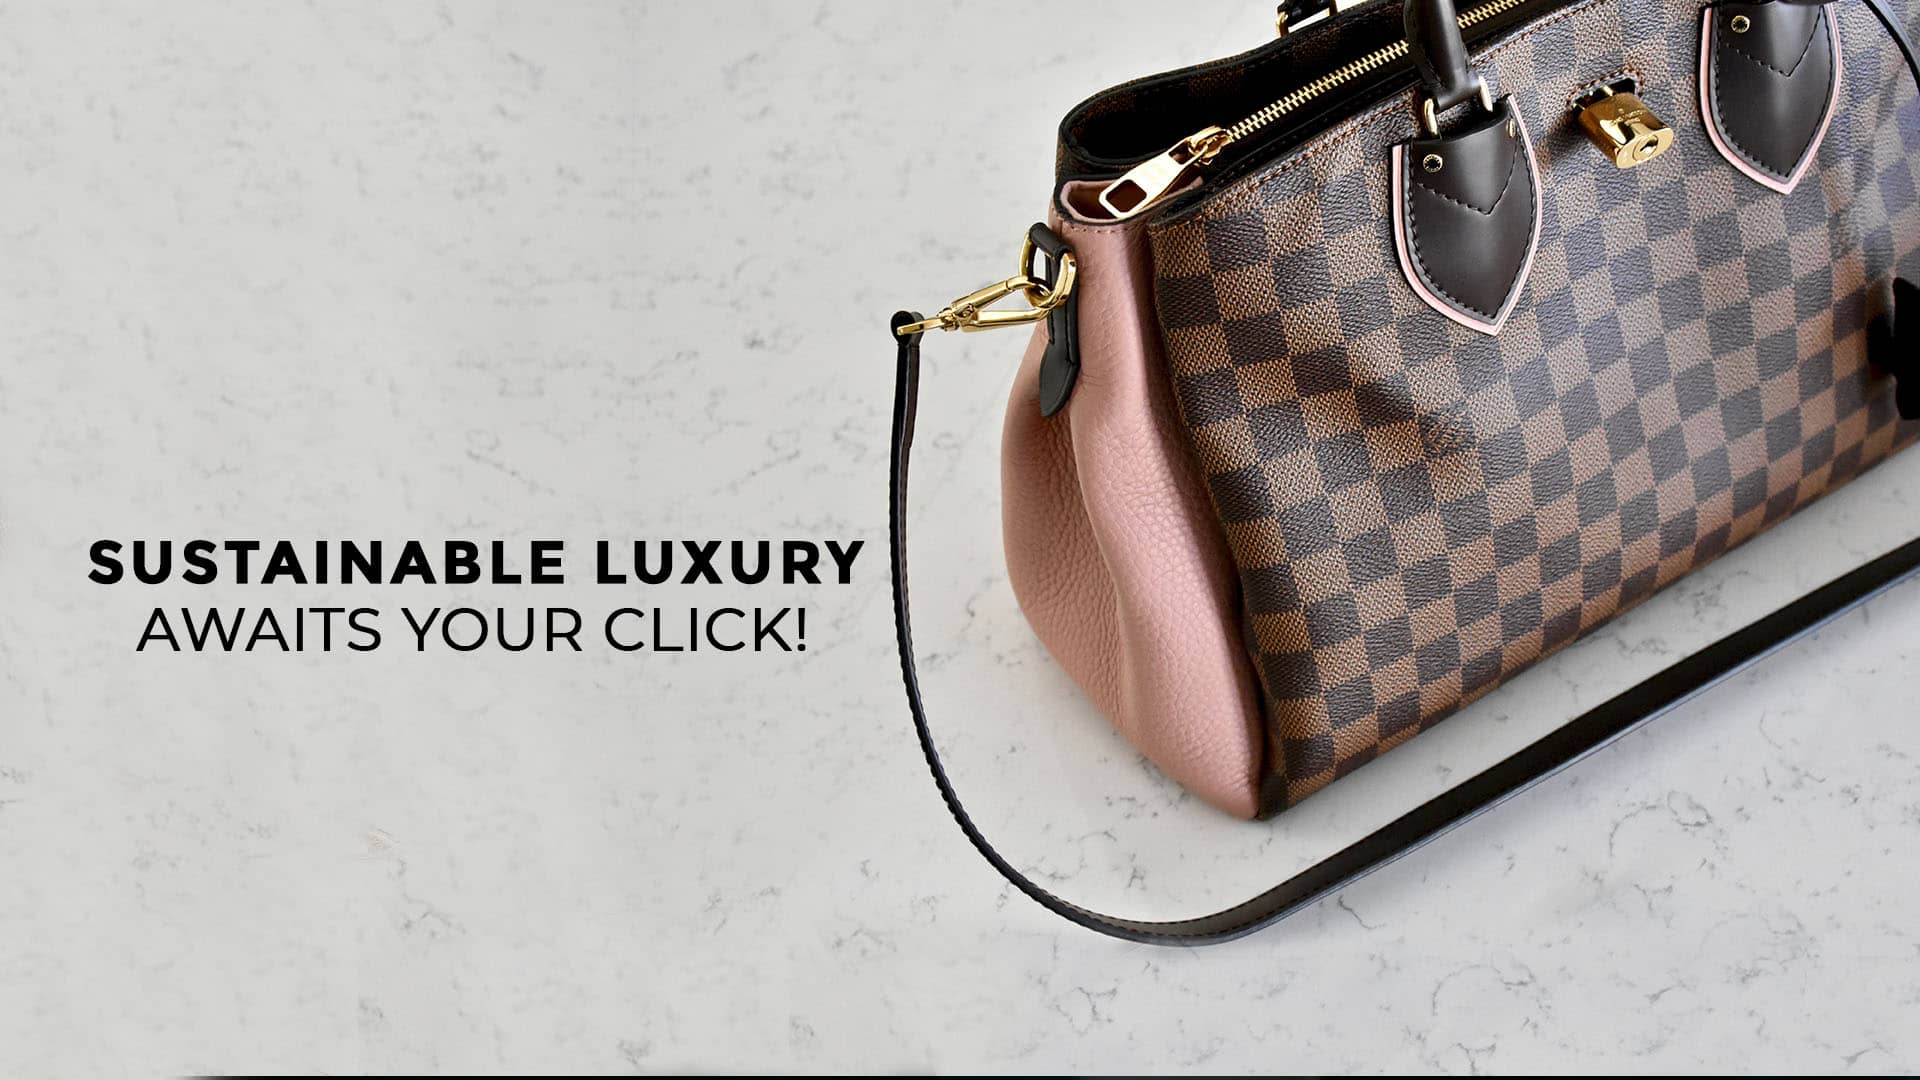 Louis Vuitton(LV) Pre owned Handbags Price Online in India